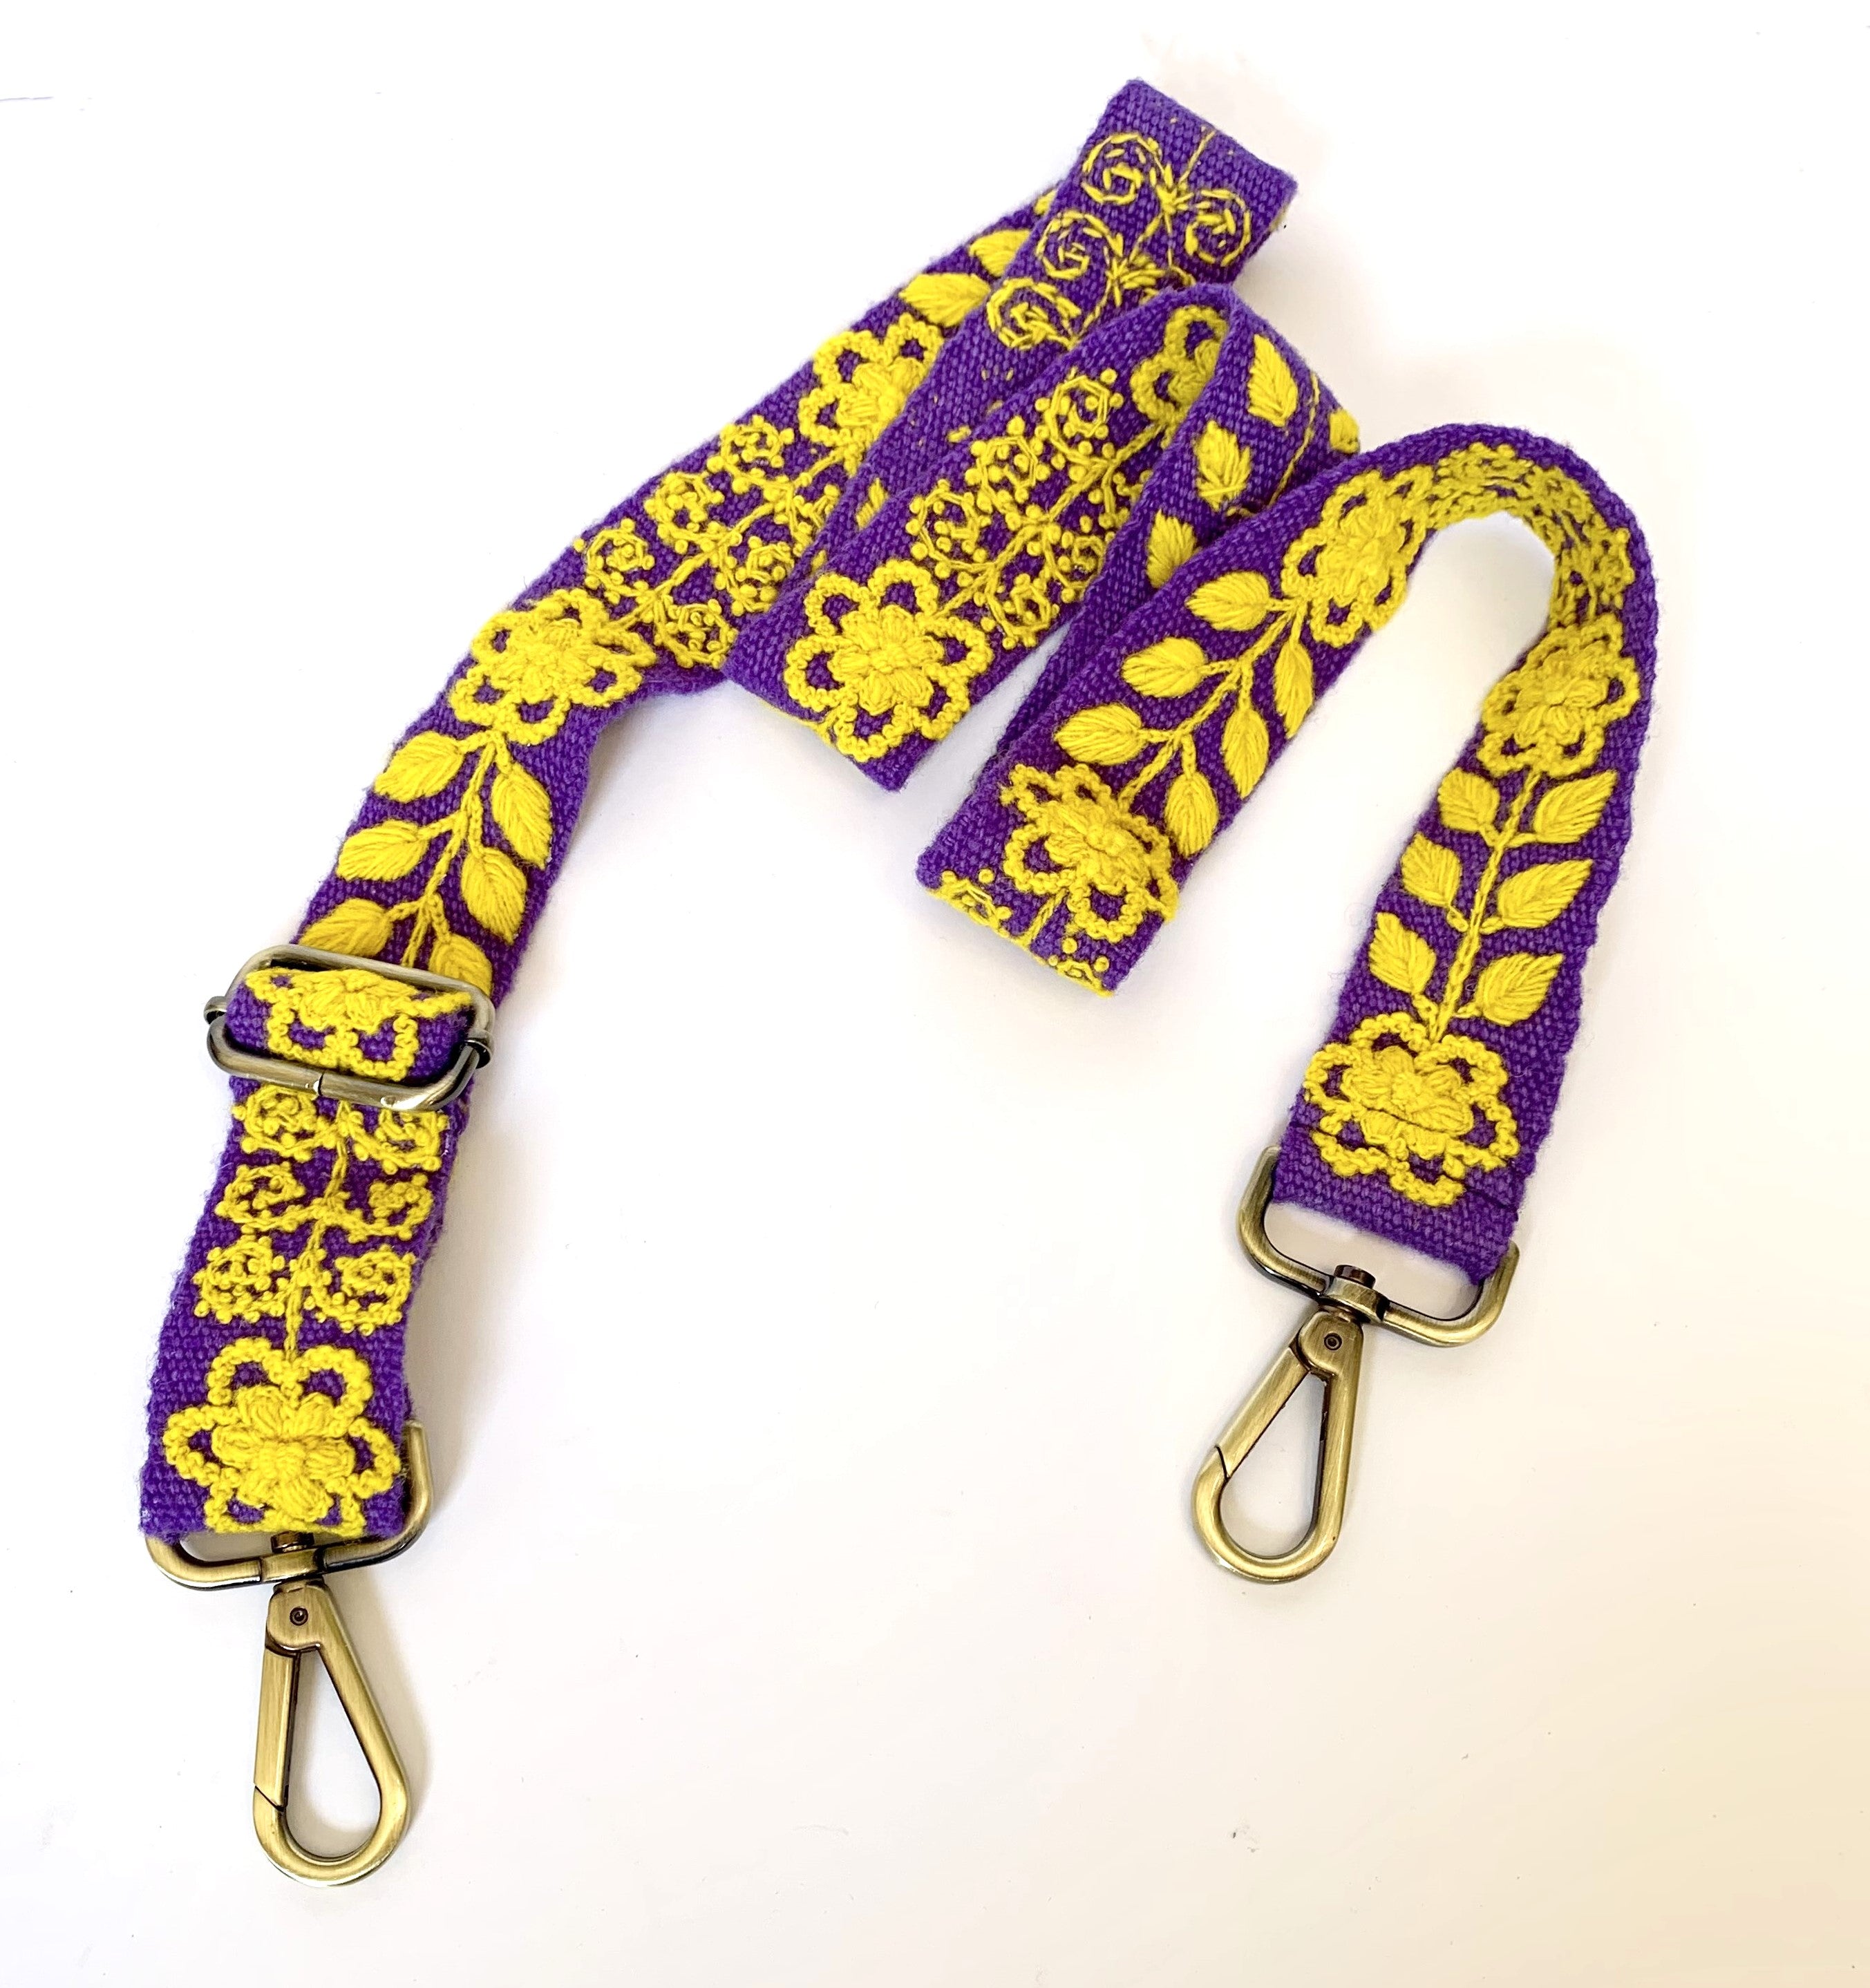 Purple and gold adjustable strap with hand-woven fabric, featuring a gold floral and leaves design. Hand-embroidered by Fair Trade artisans in Peru. Perfect for game day or a night out.